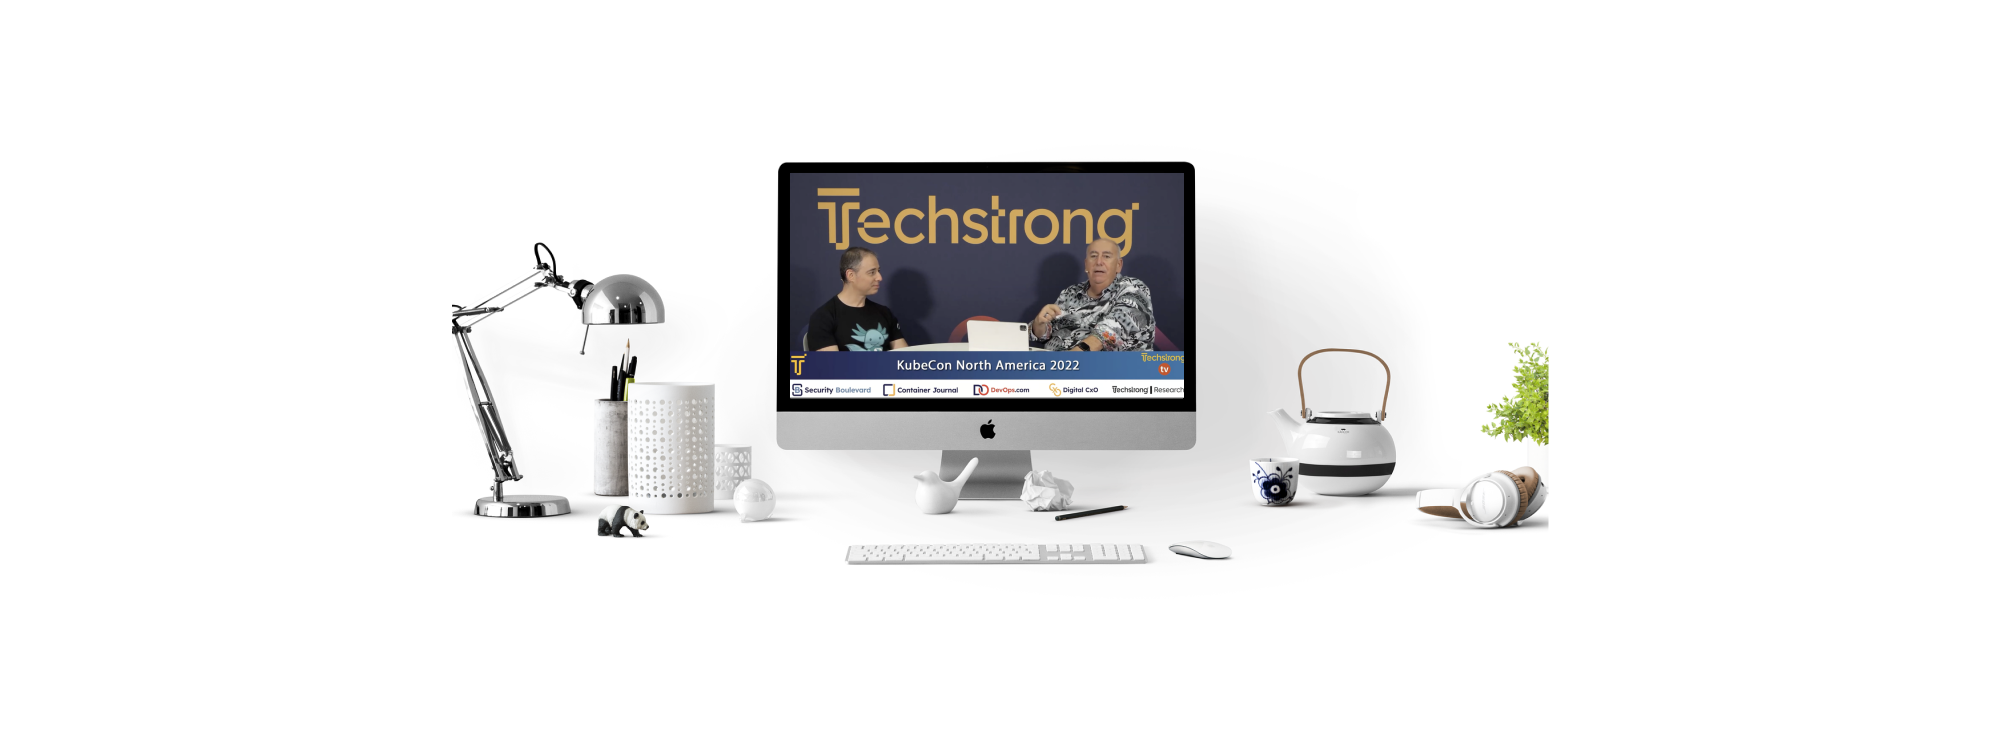 Cloud-native authorization on Techstrong TV